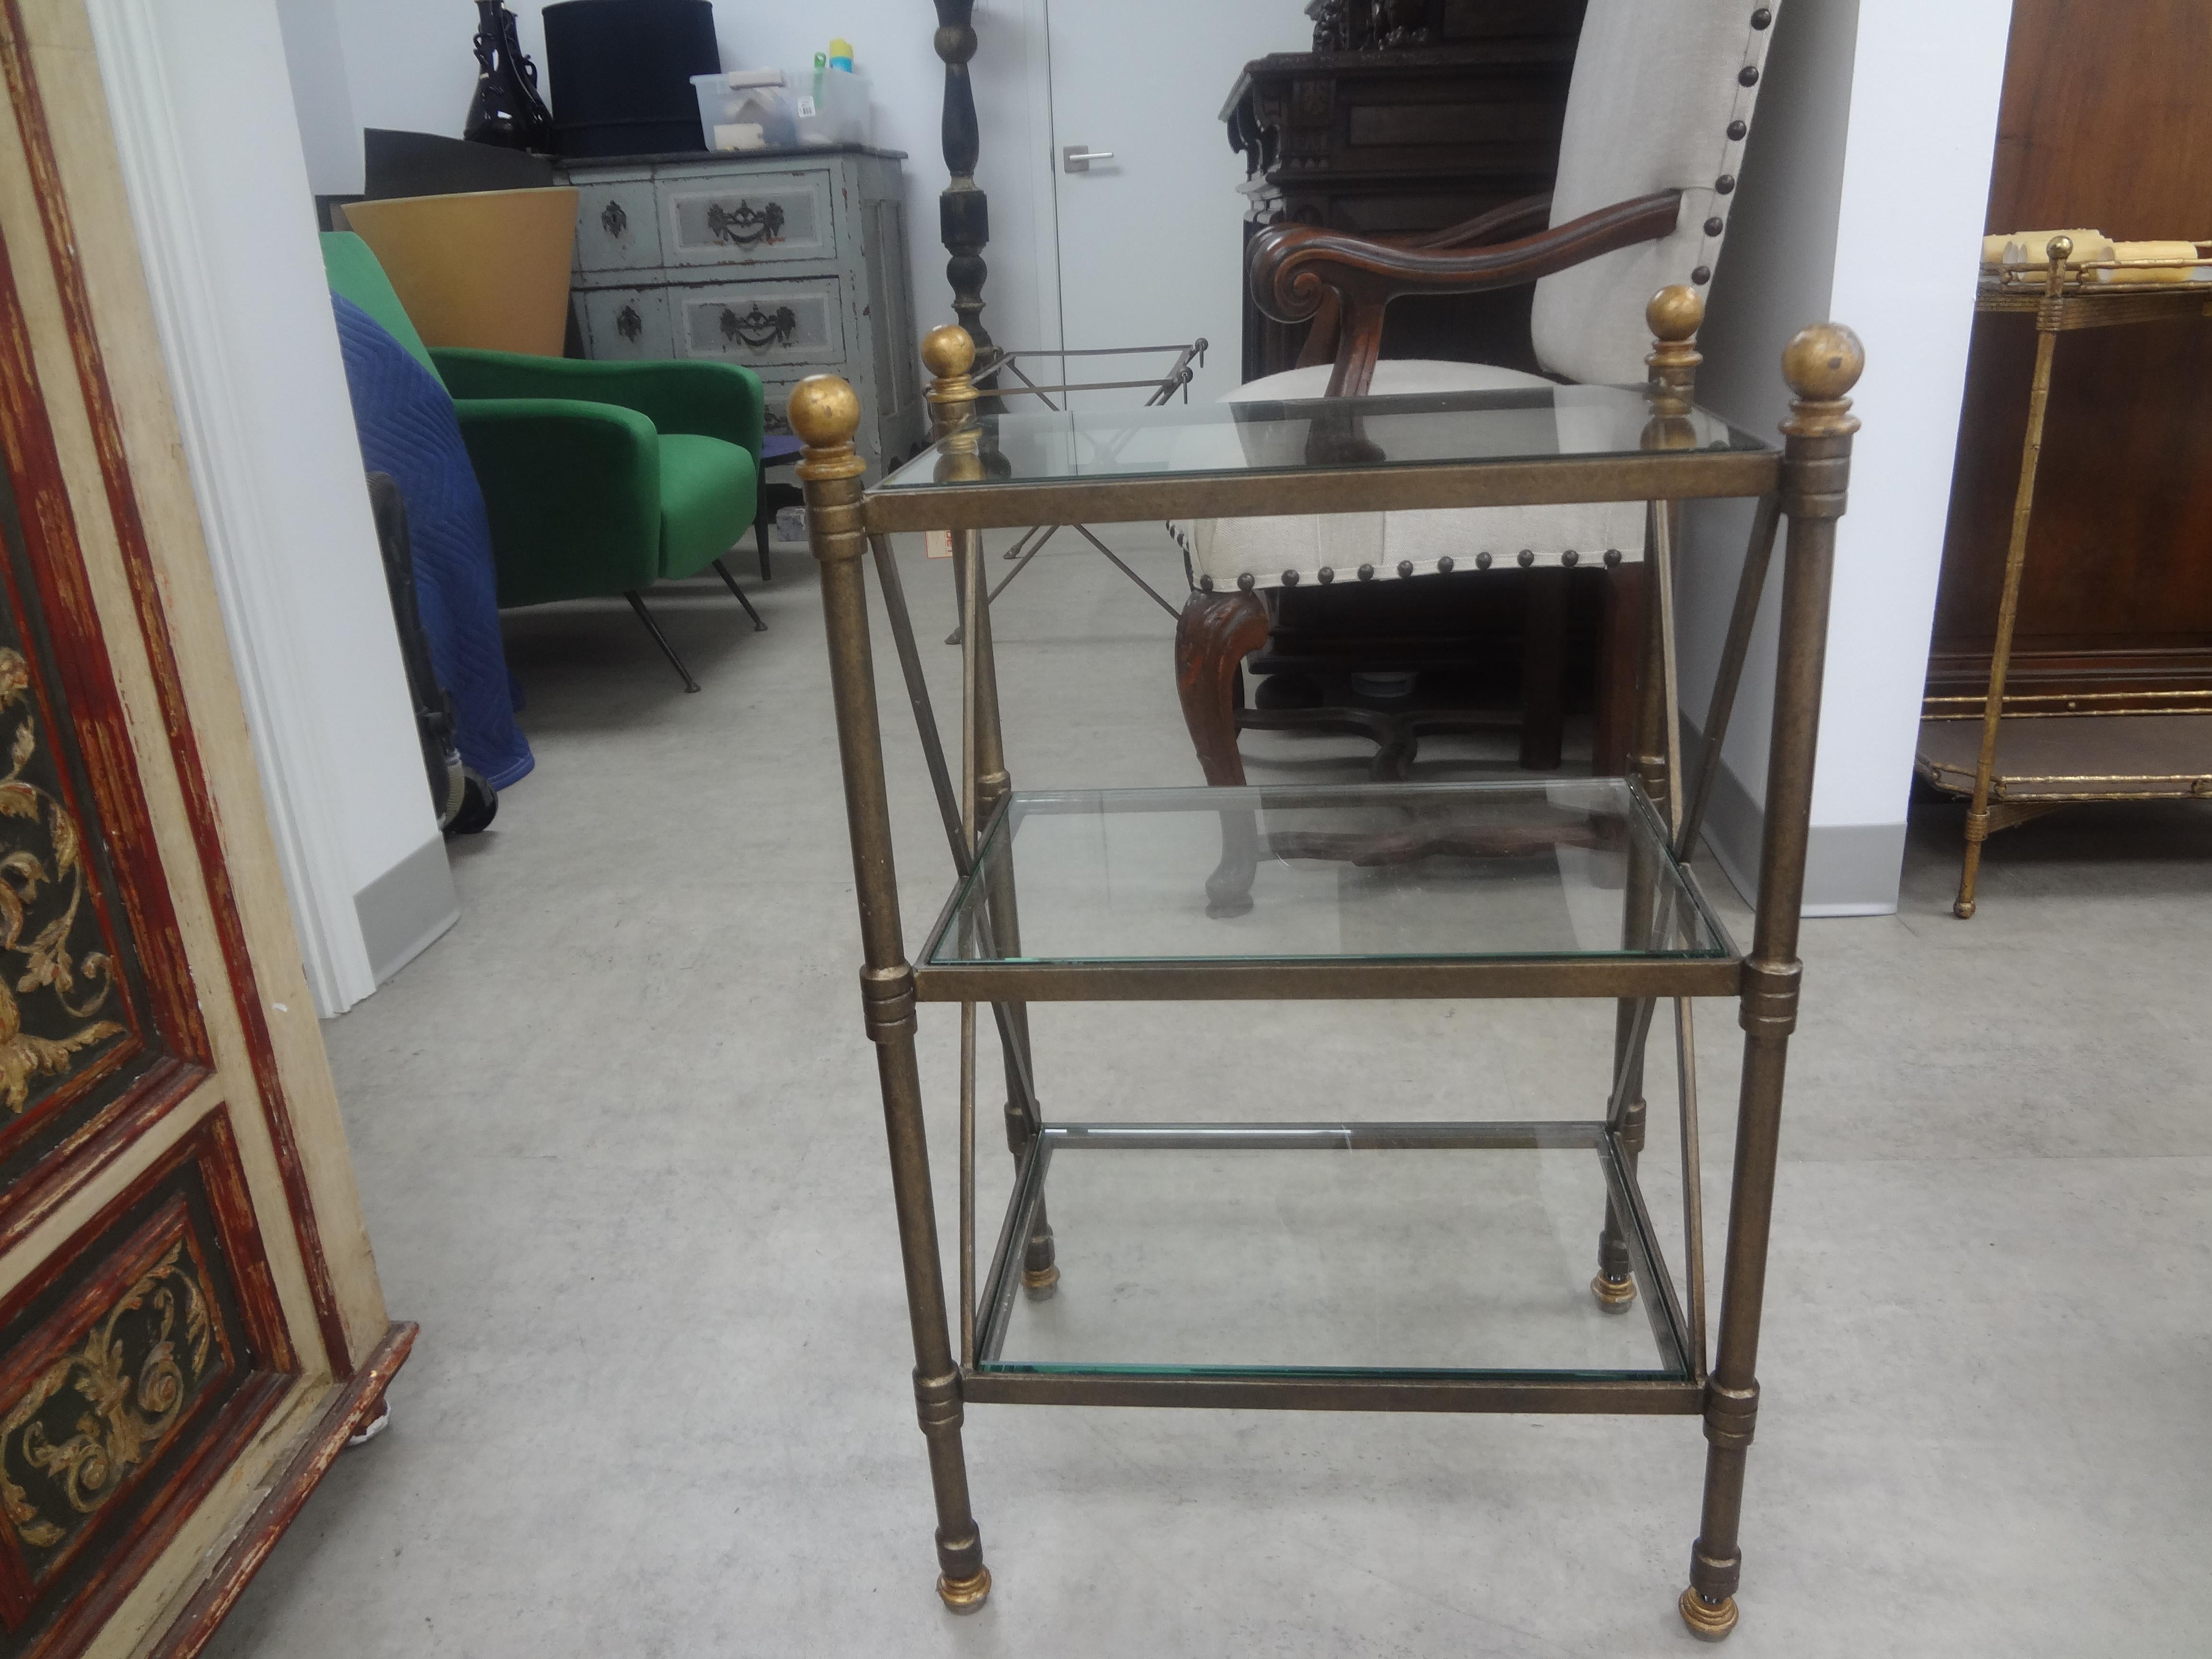 Vintage French Neoclassical Style Bronzed Iron Table.
This versatile Neoclassical style 3 tired heavy weight bronzed iron table with glass shelves is the perfect side table, end table, drink table,  gueridon or lamp table.